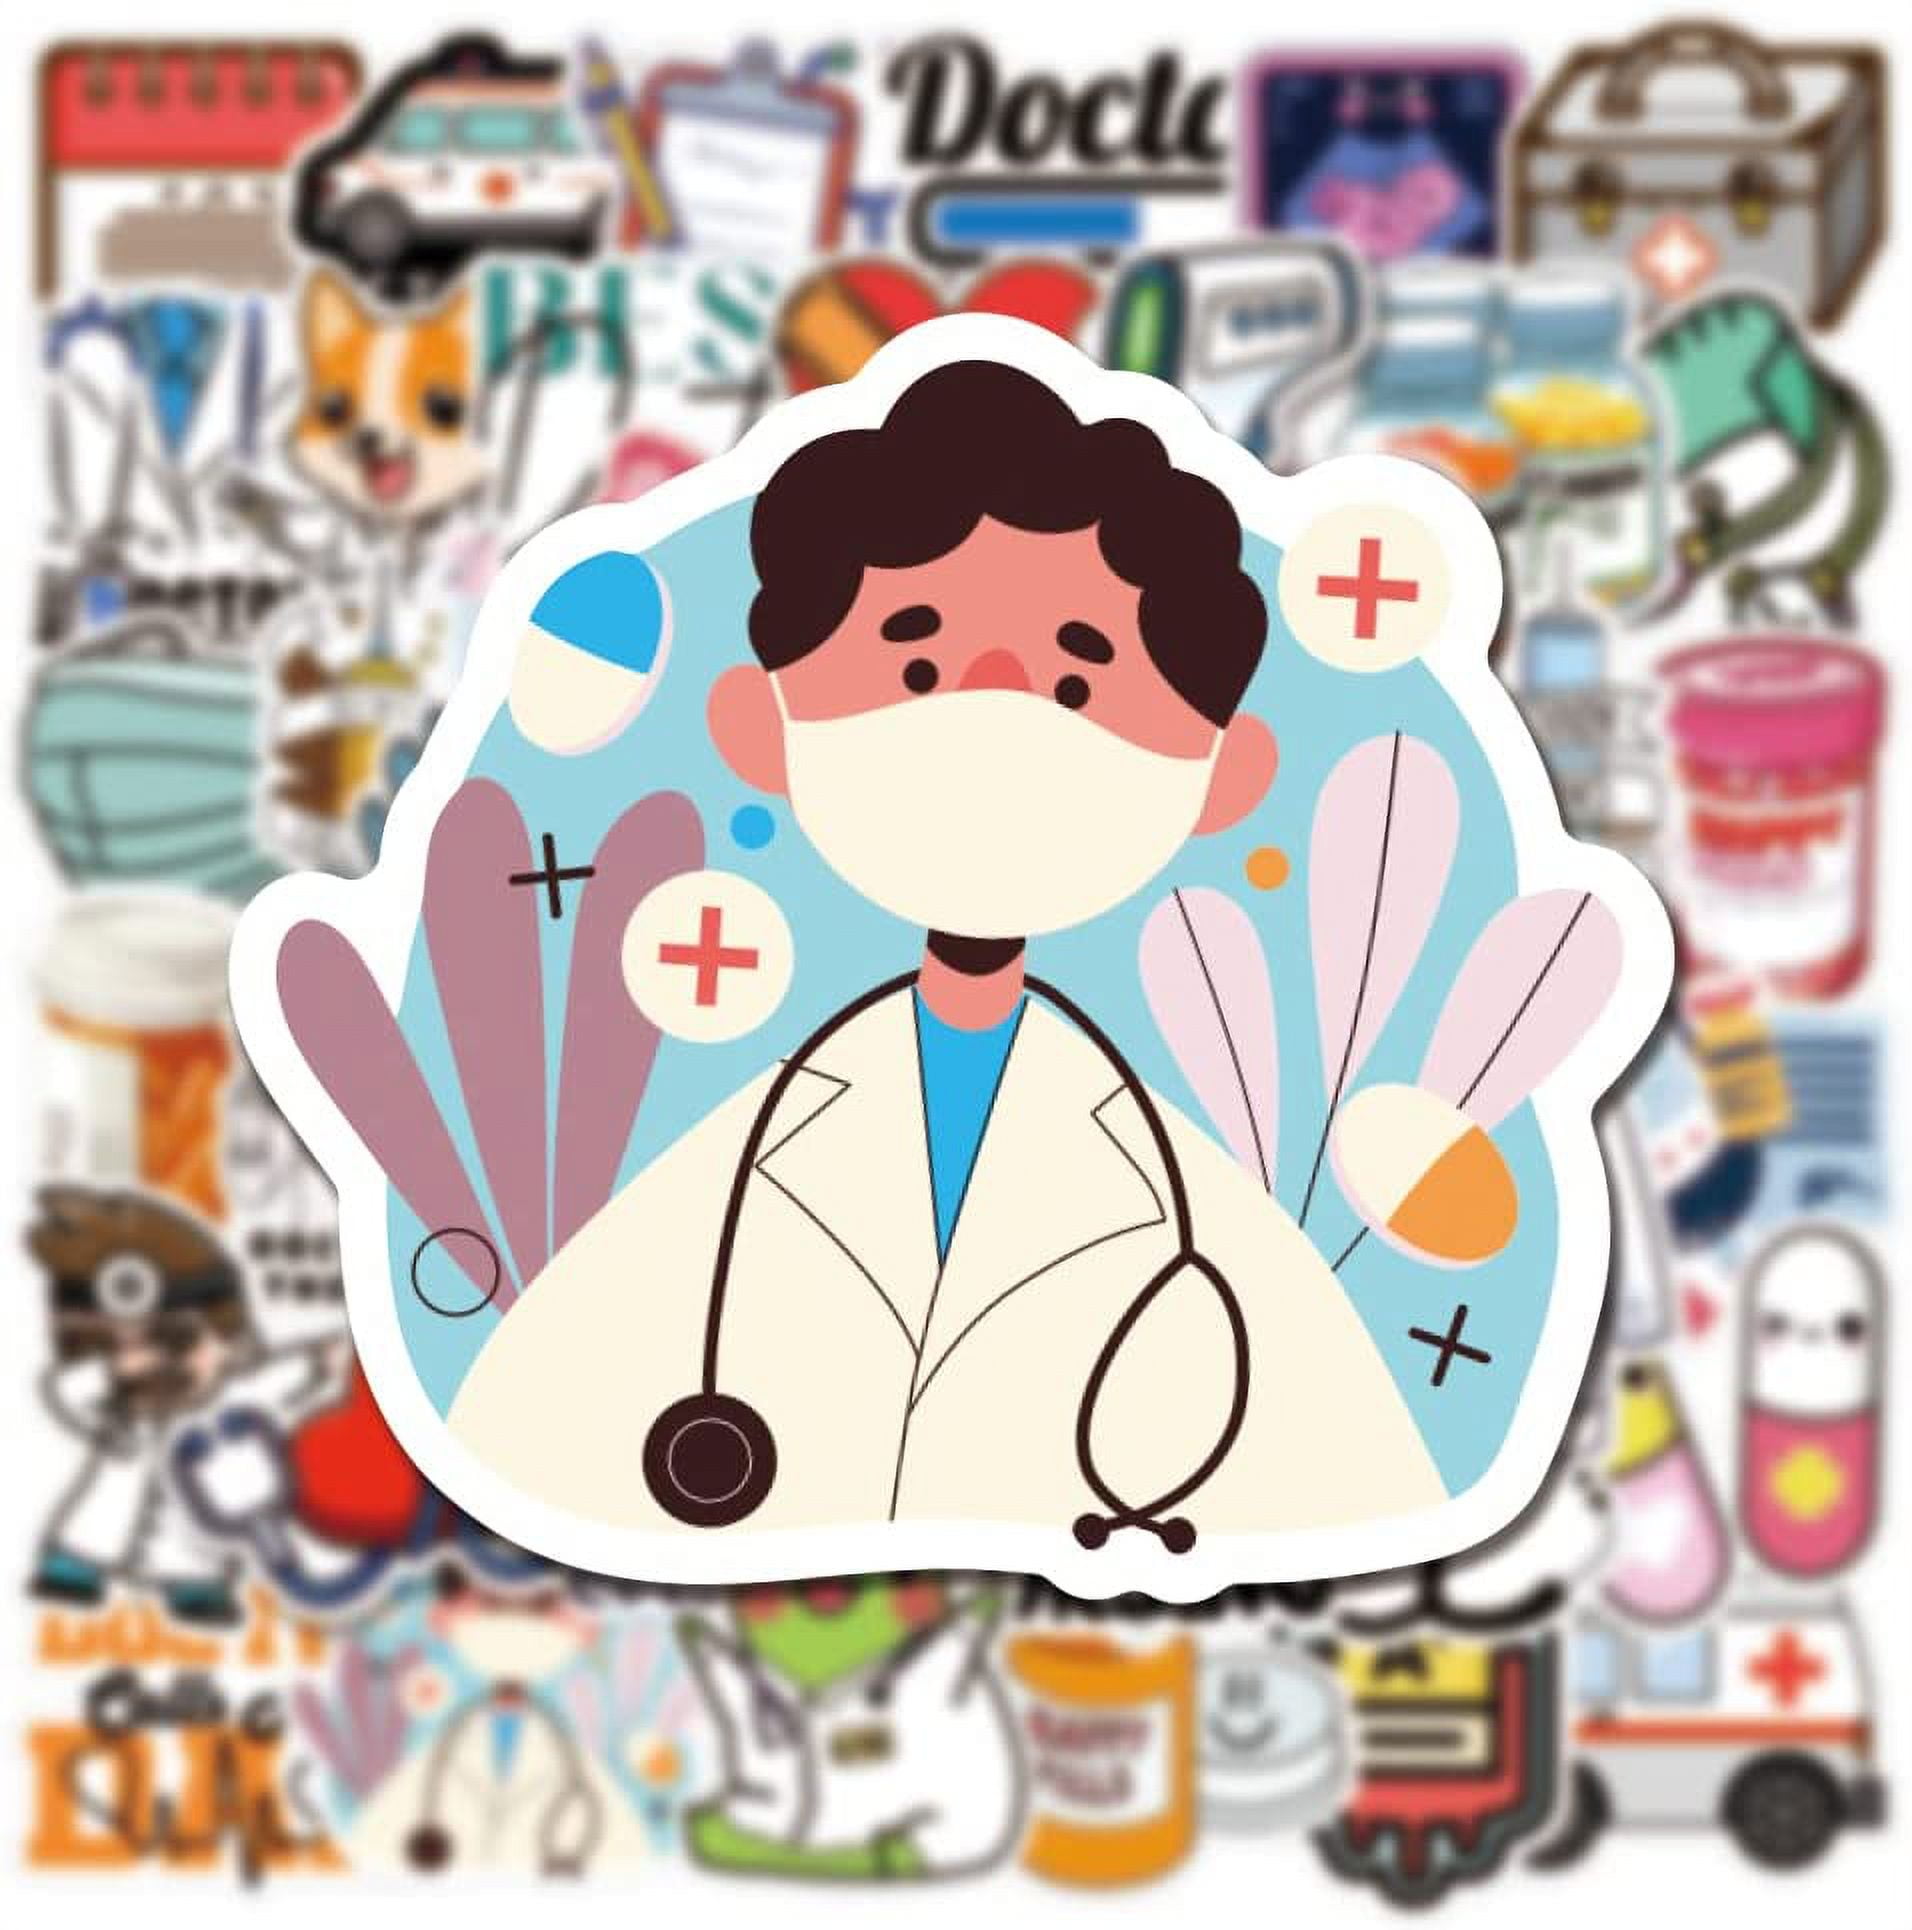 55PCS Nursing Stickers Medical Assistant Stickers Doctor Stickers Vinyl  Waterproof Stickers for Water Bottle,Computer,Laptop,Phone,Luggage,Notebook